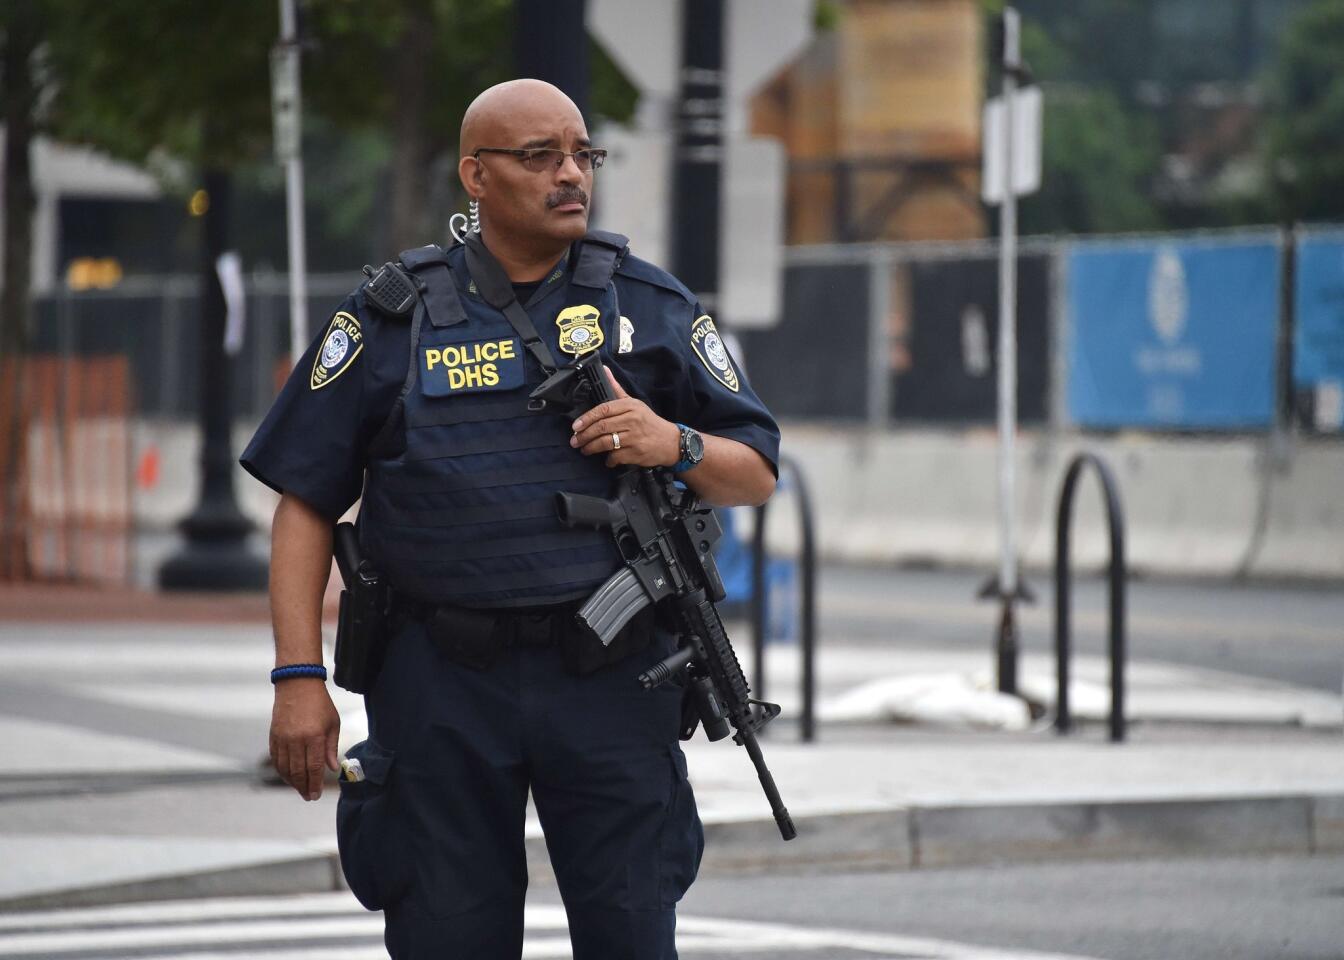 Law enforcement responds to unfounded reports of a shooting at the Washington Navy Yard.